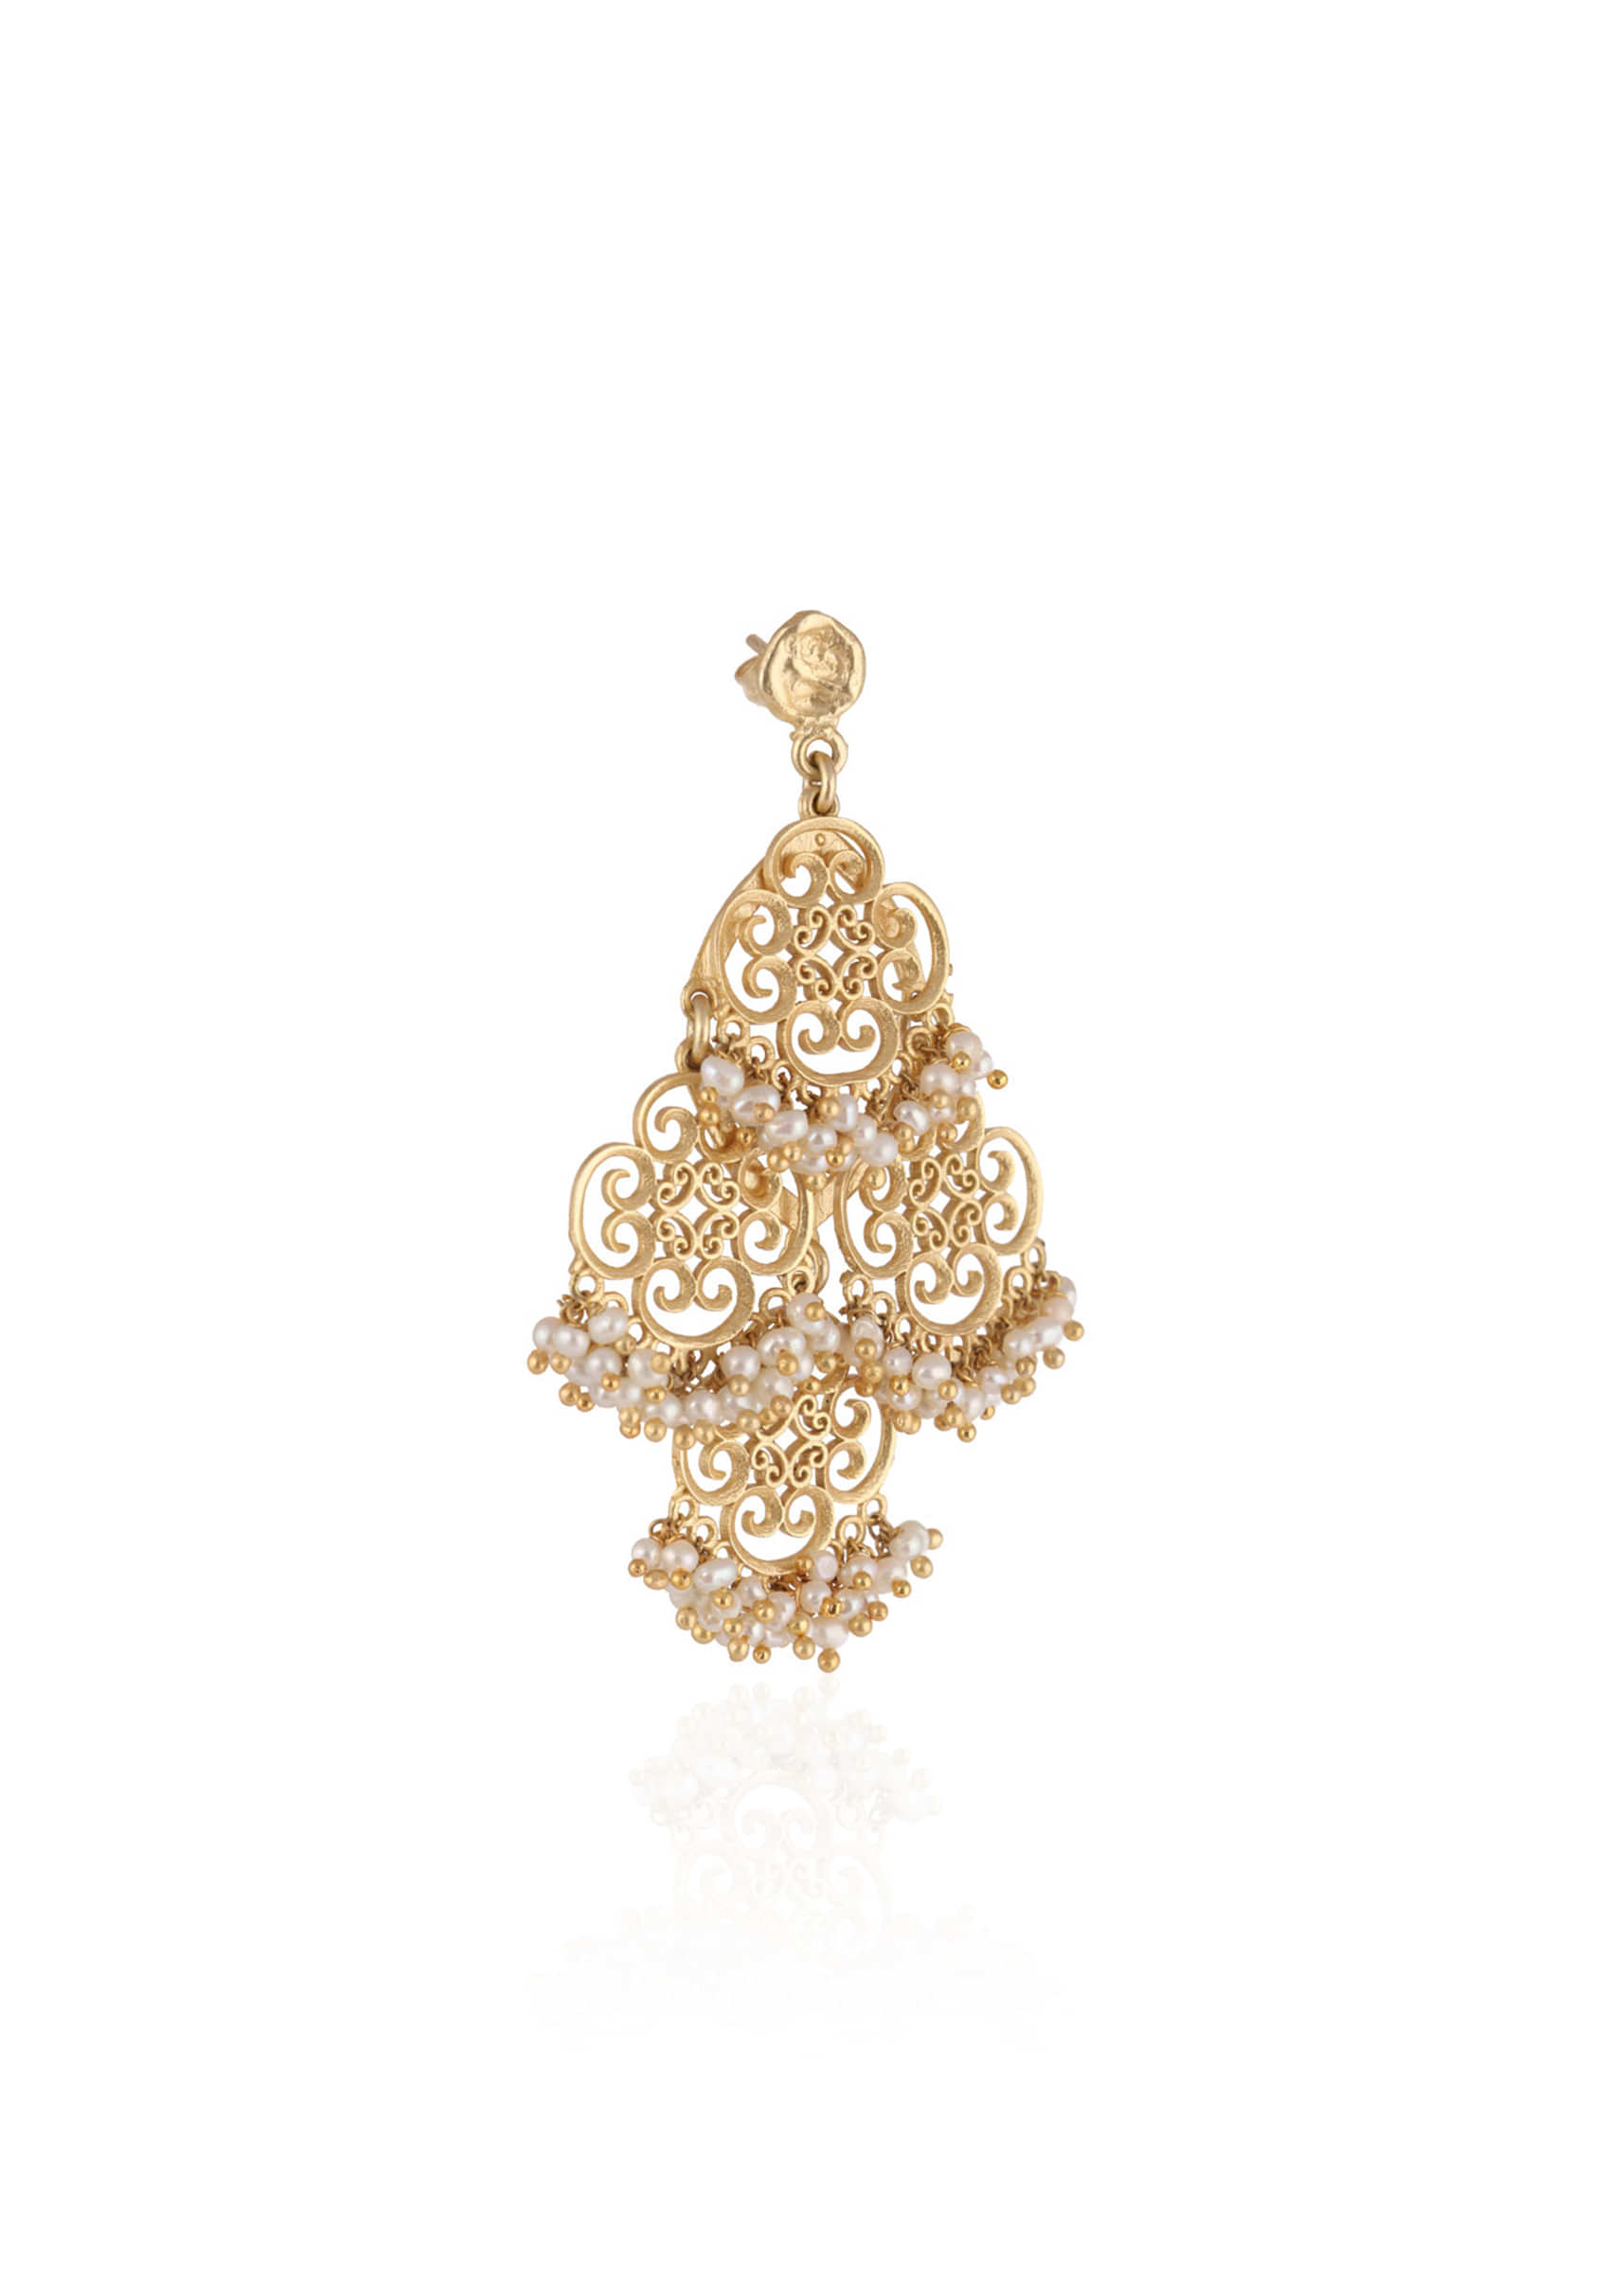 Gold Plated Chandelier Earrings With Delicate Pearl Beads And Intricate Filigree Motifs By Zariin